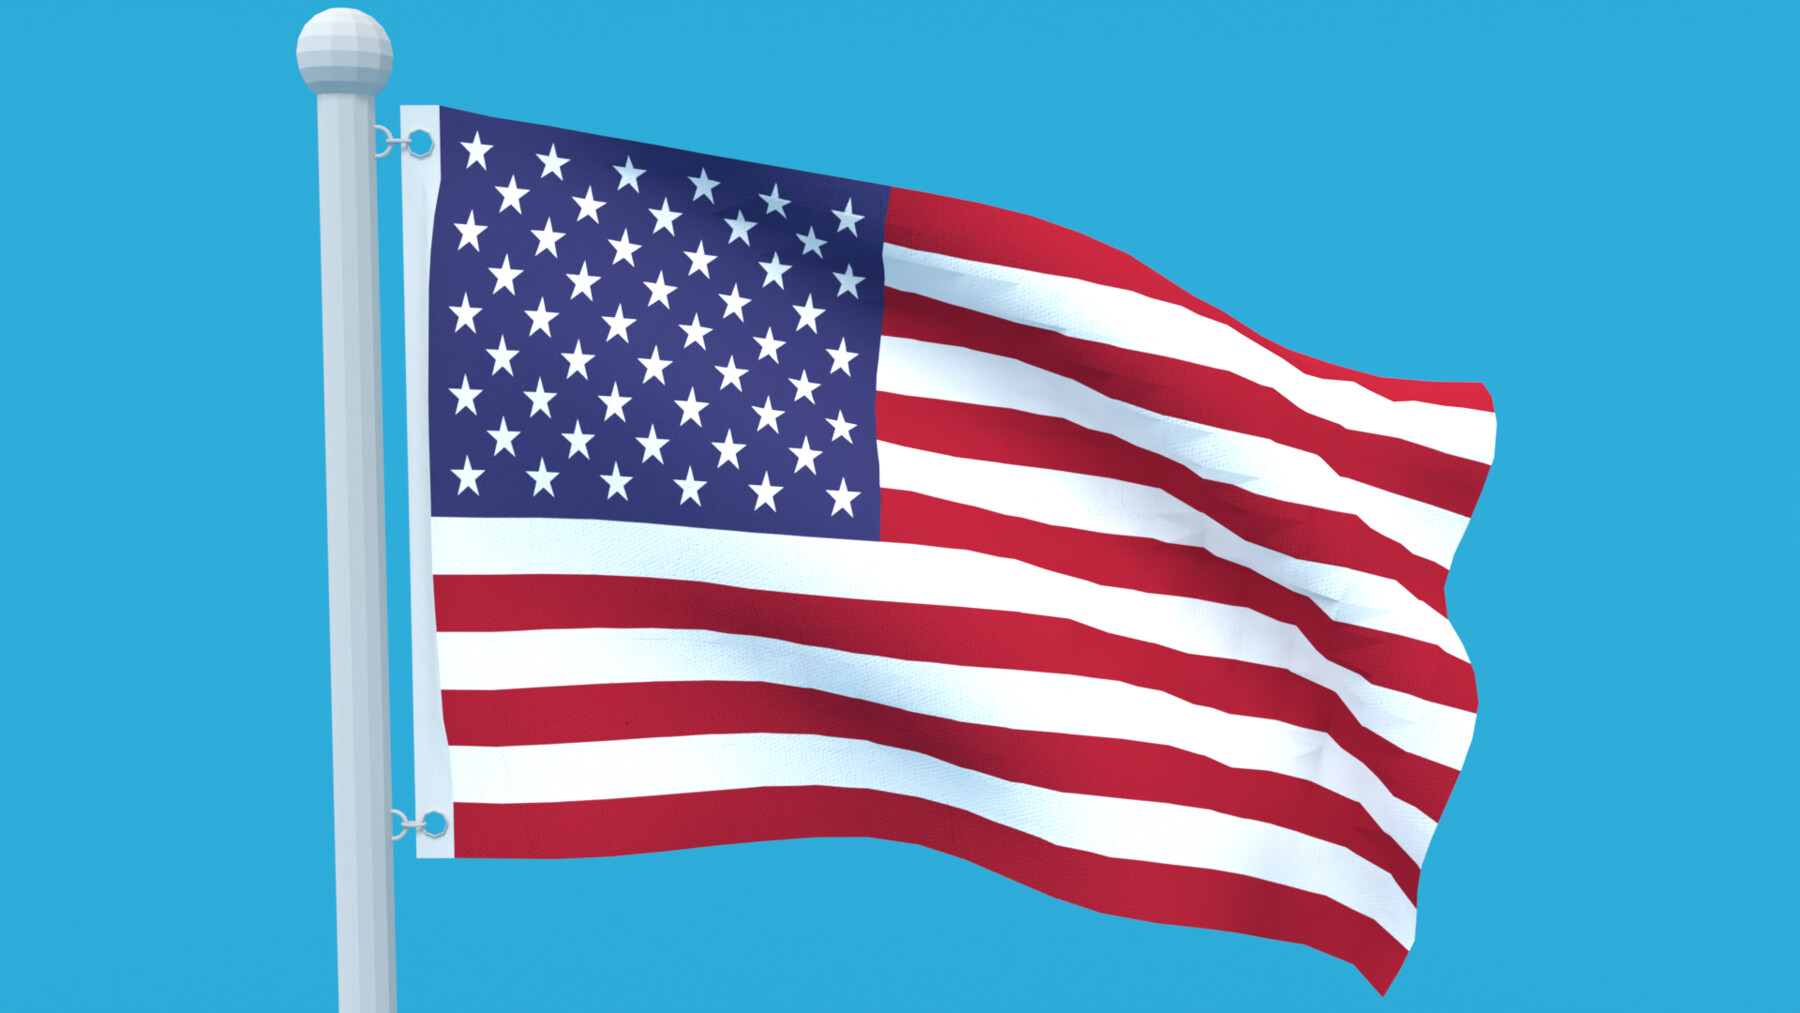 animated american flag background